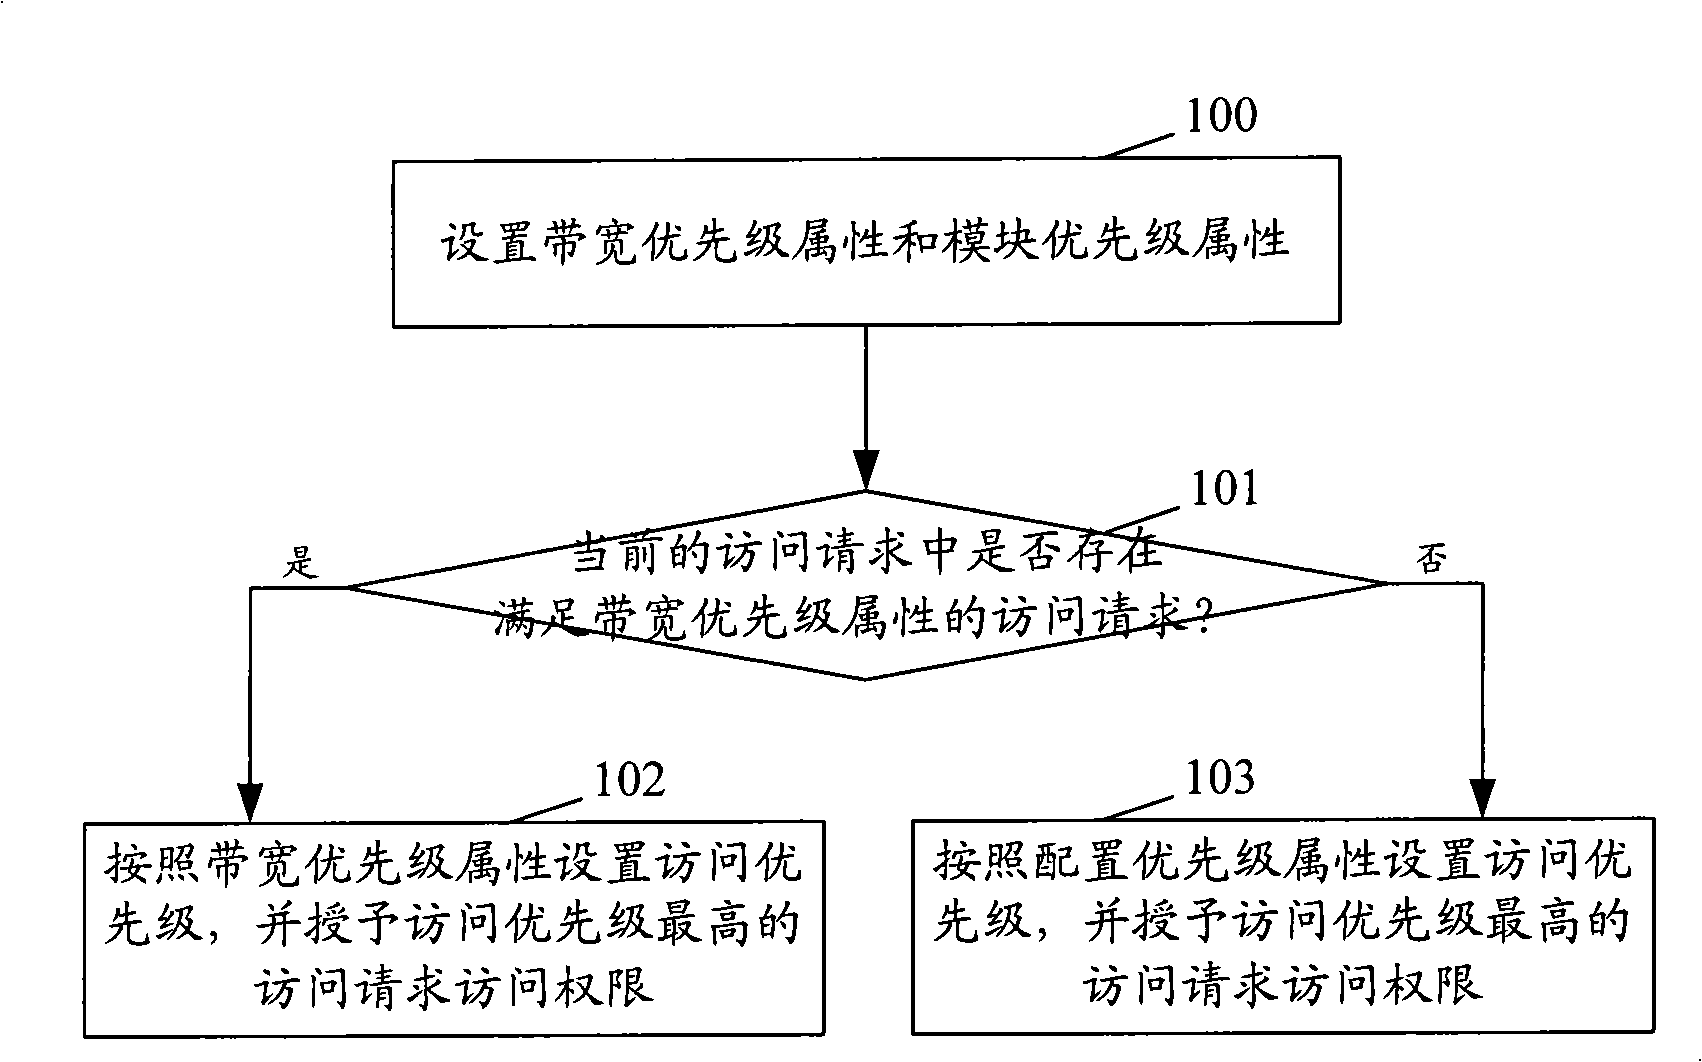 Method for access to external memory